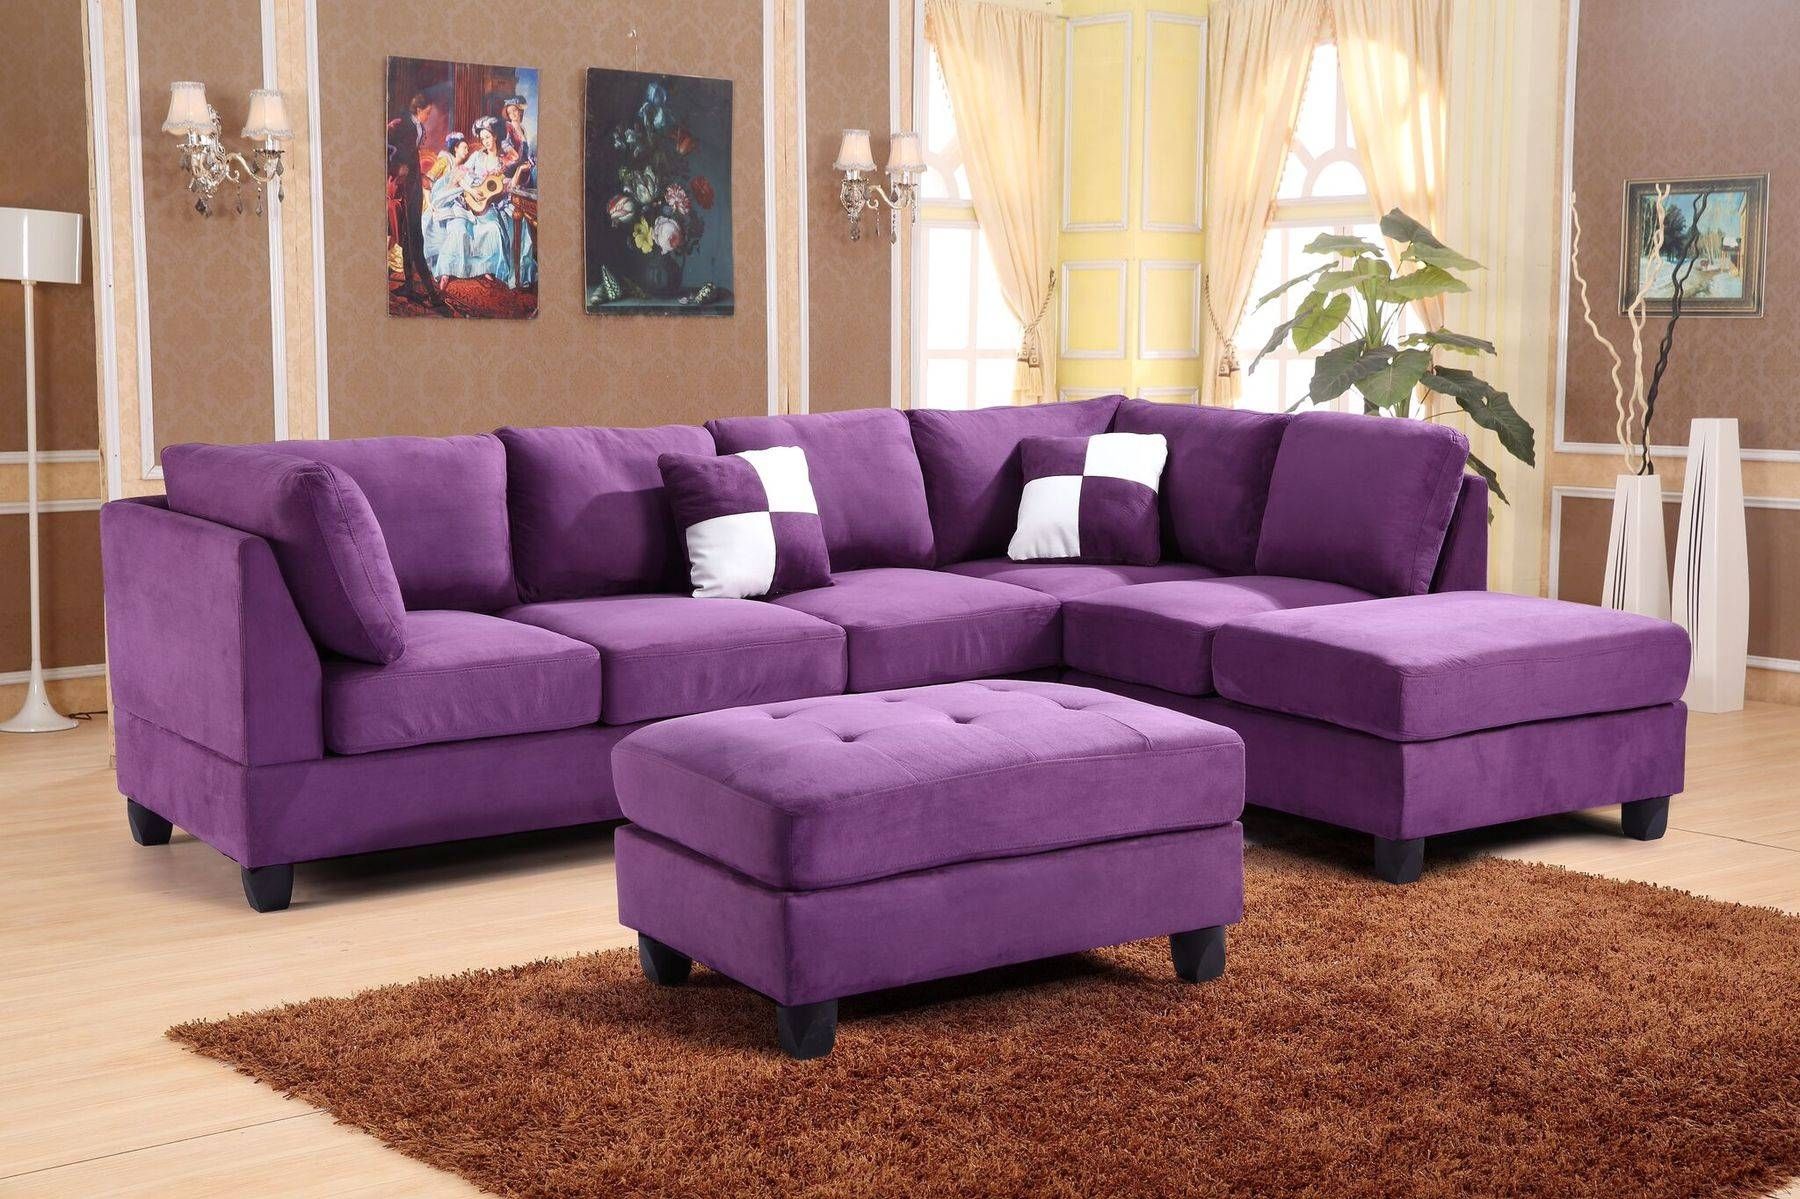 Sofas Center : Excellent Purple Sectional Sofa Photos Design Intended For Eggplant Sectional Sofa (View 25 of 30)